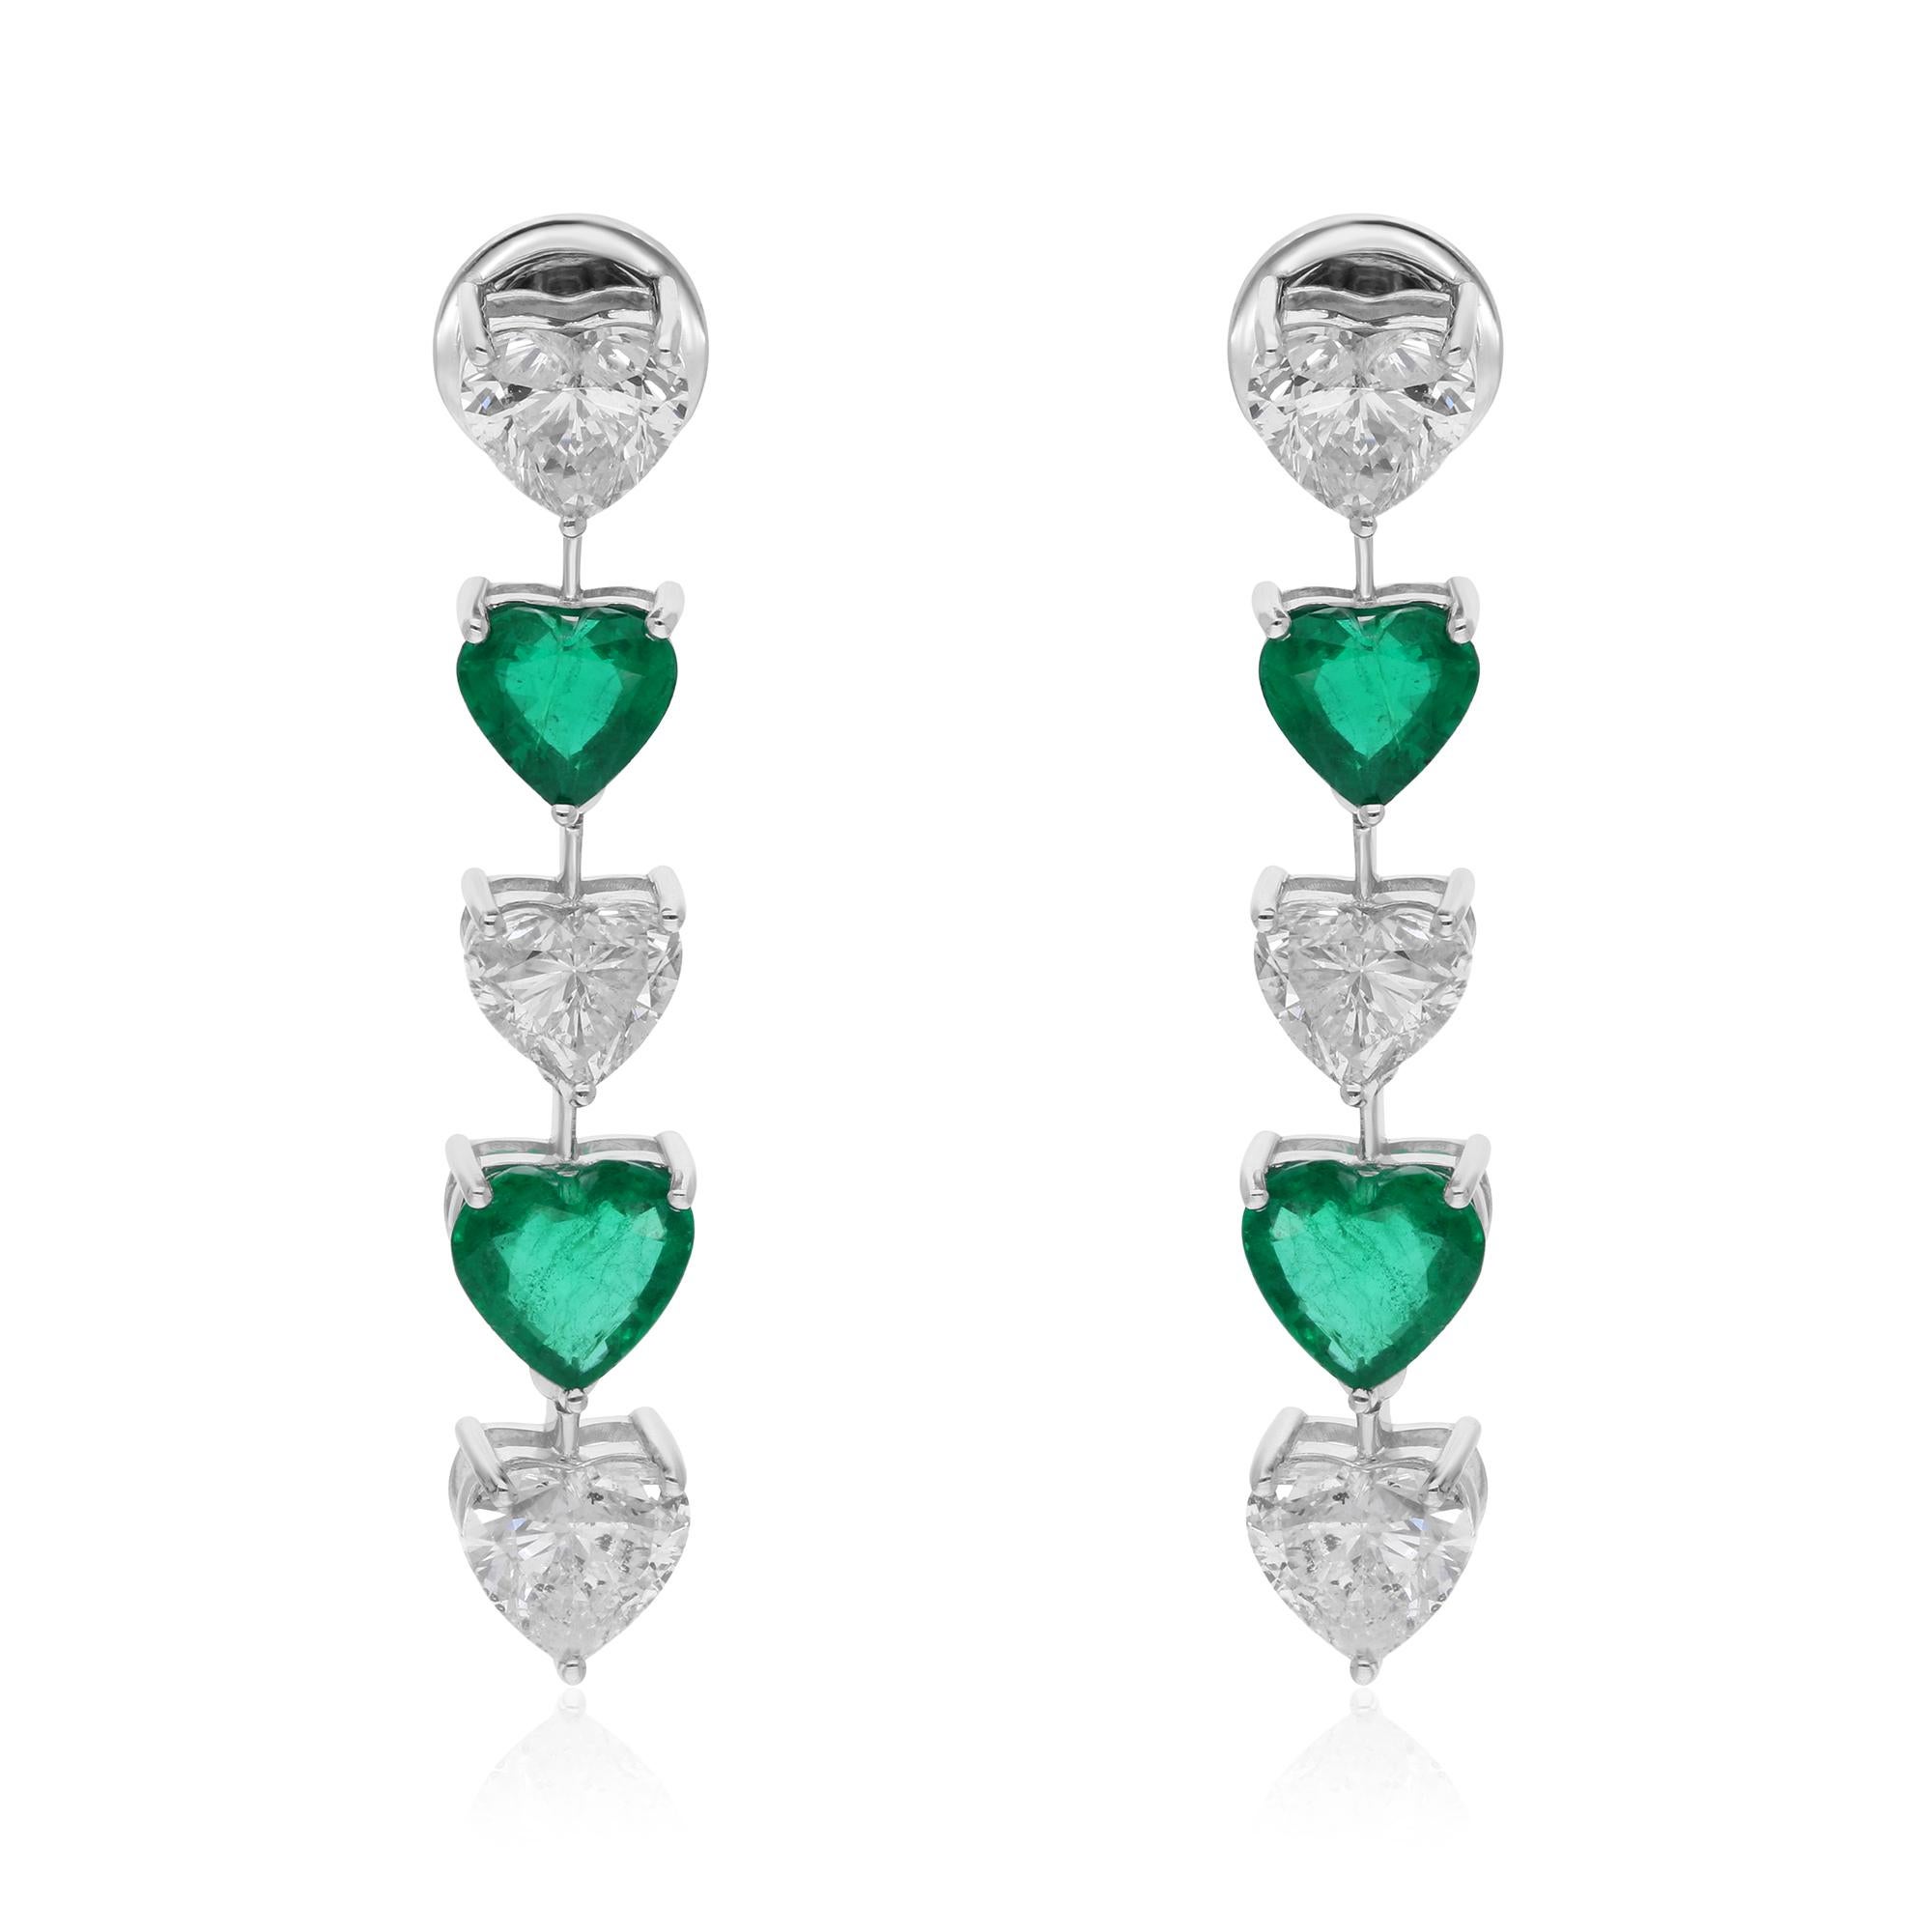 At the center of each earring dangles a mesmerizing heart-shaped Zambian emerald, renowned for its rich green hue and exceptional clarity. Sourced from the prestigious mines of Zambia, these emeralds exude an aura of luxury and sophistication,